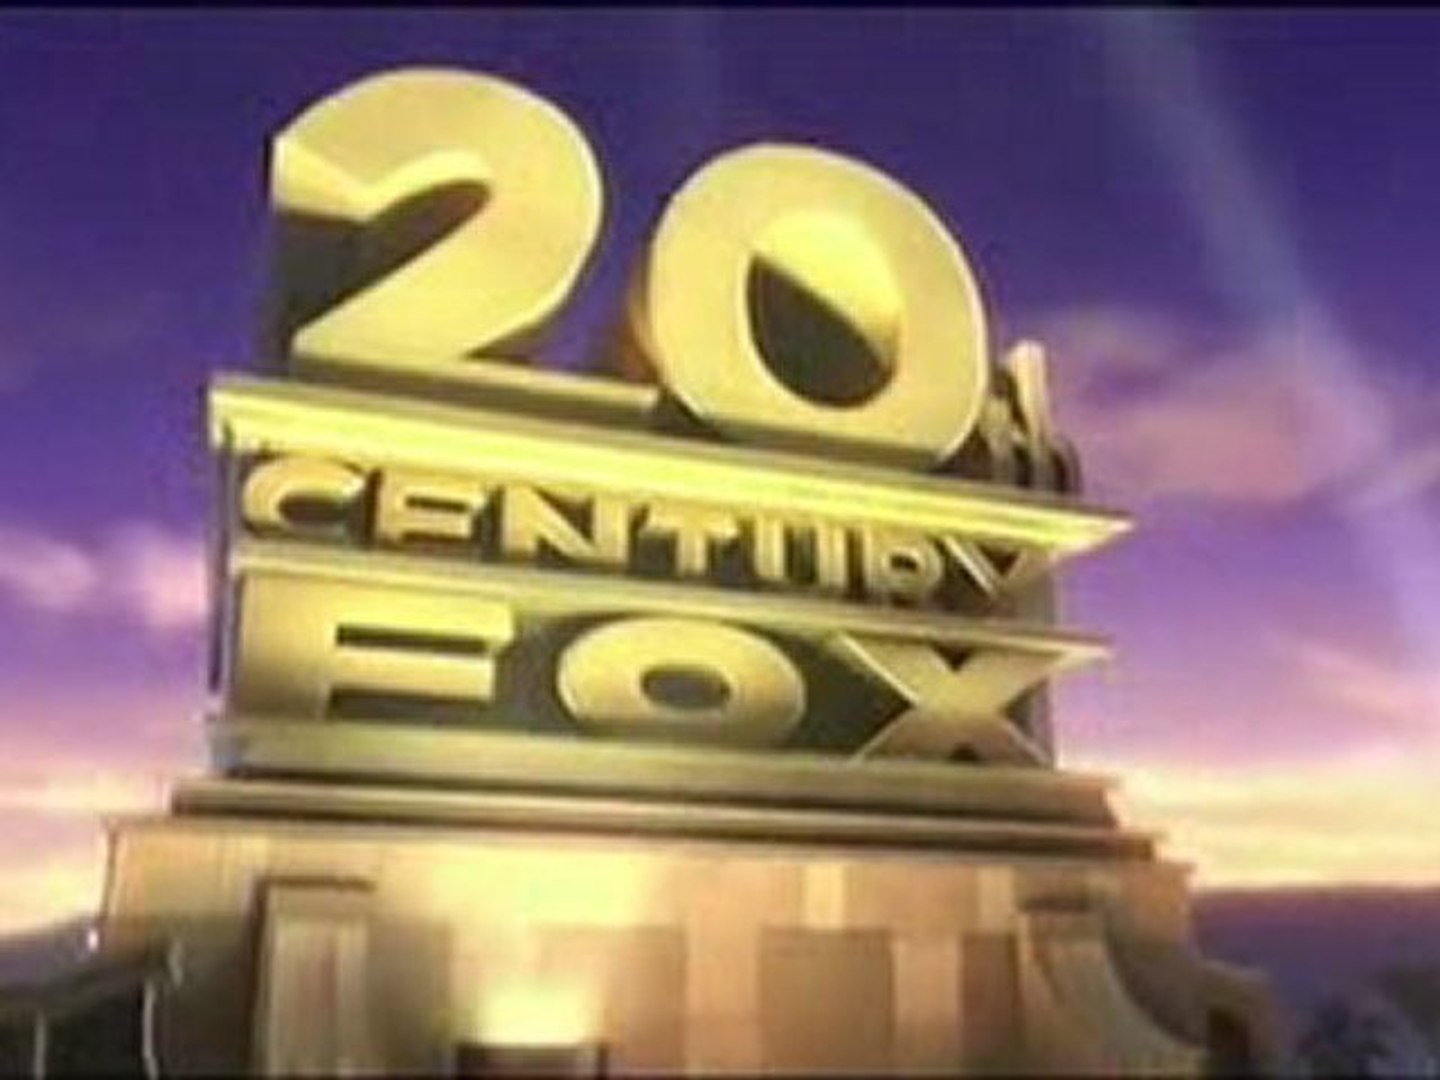 20th Century Fox Intro (Free Template Download) - video Dailymotion